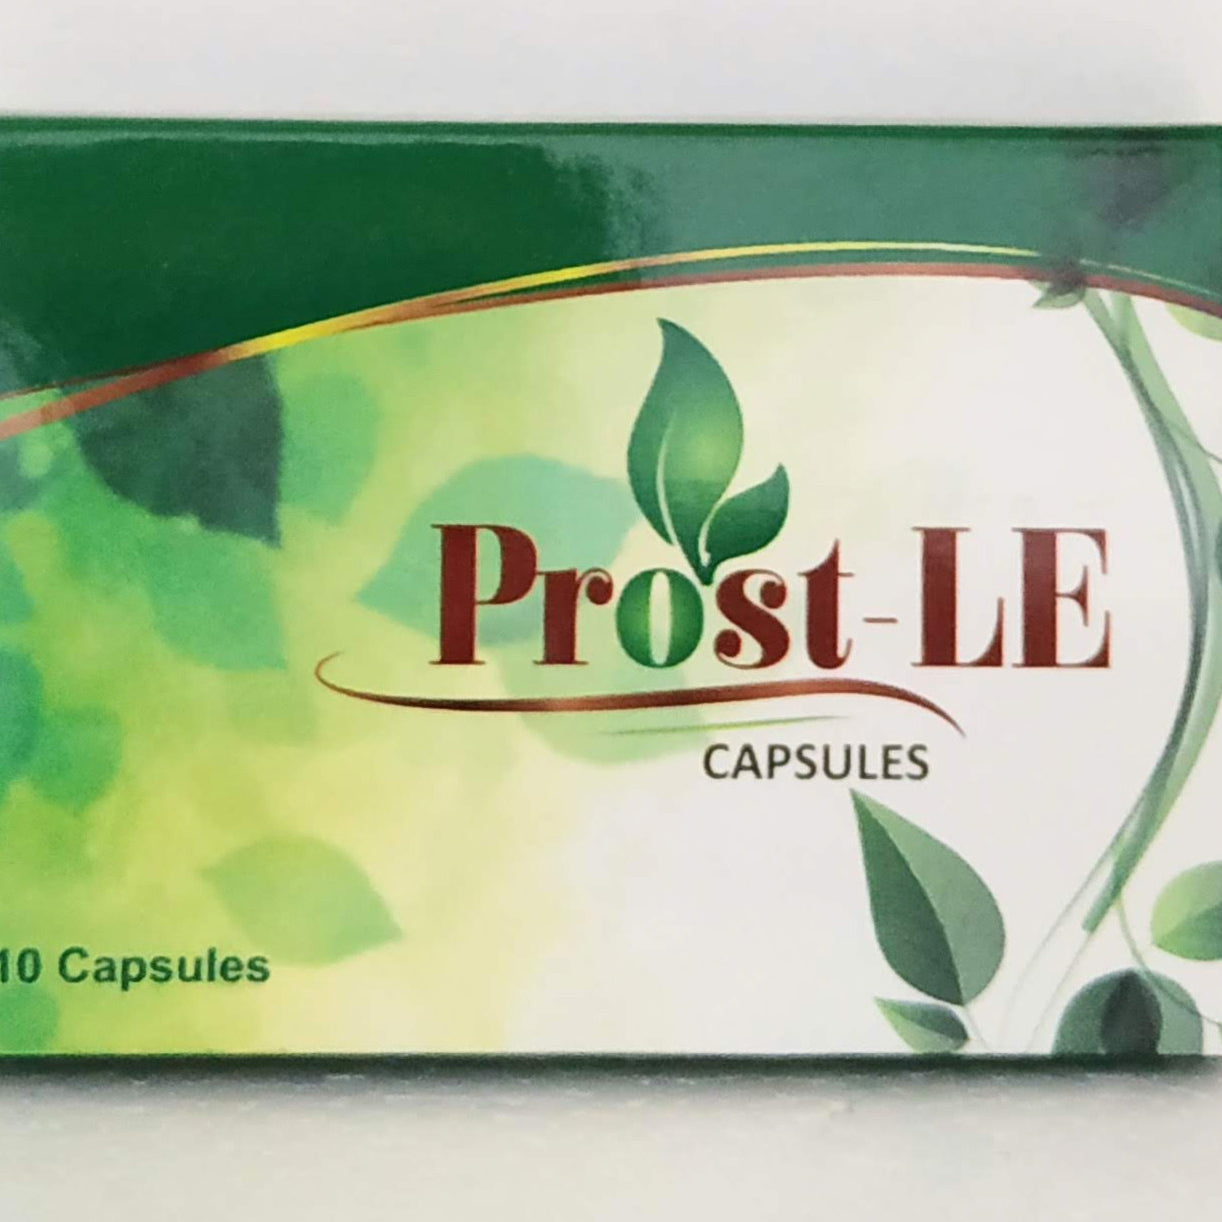 Shop Prost-LE capsules - 10Capsules at price 84.00 from Wintrust Online - Ayush Care